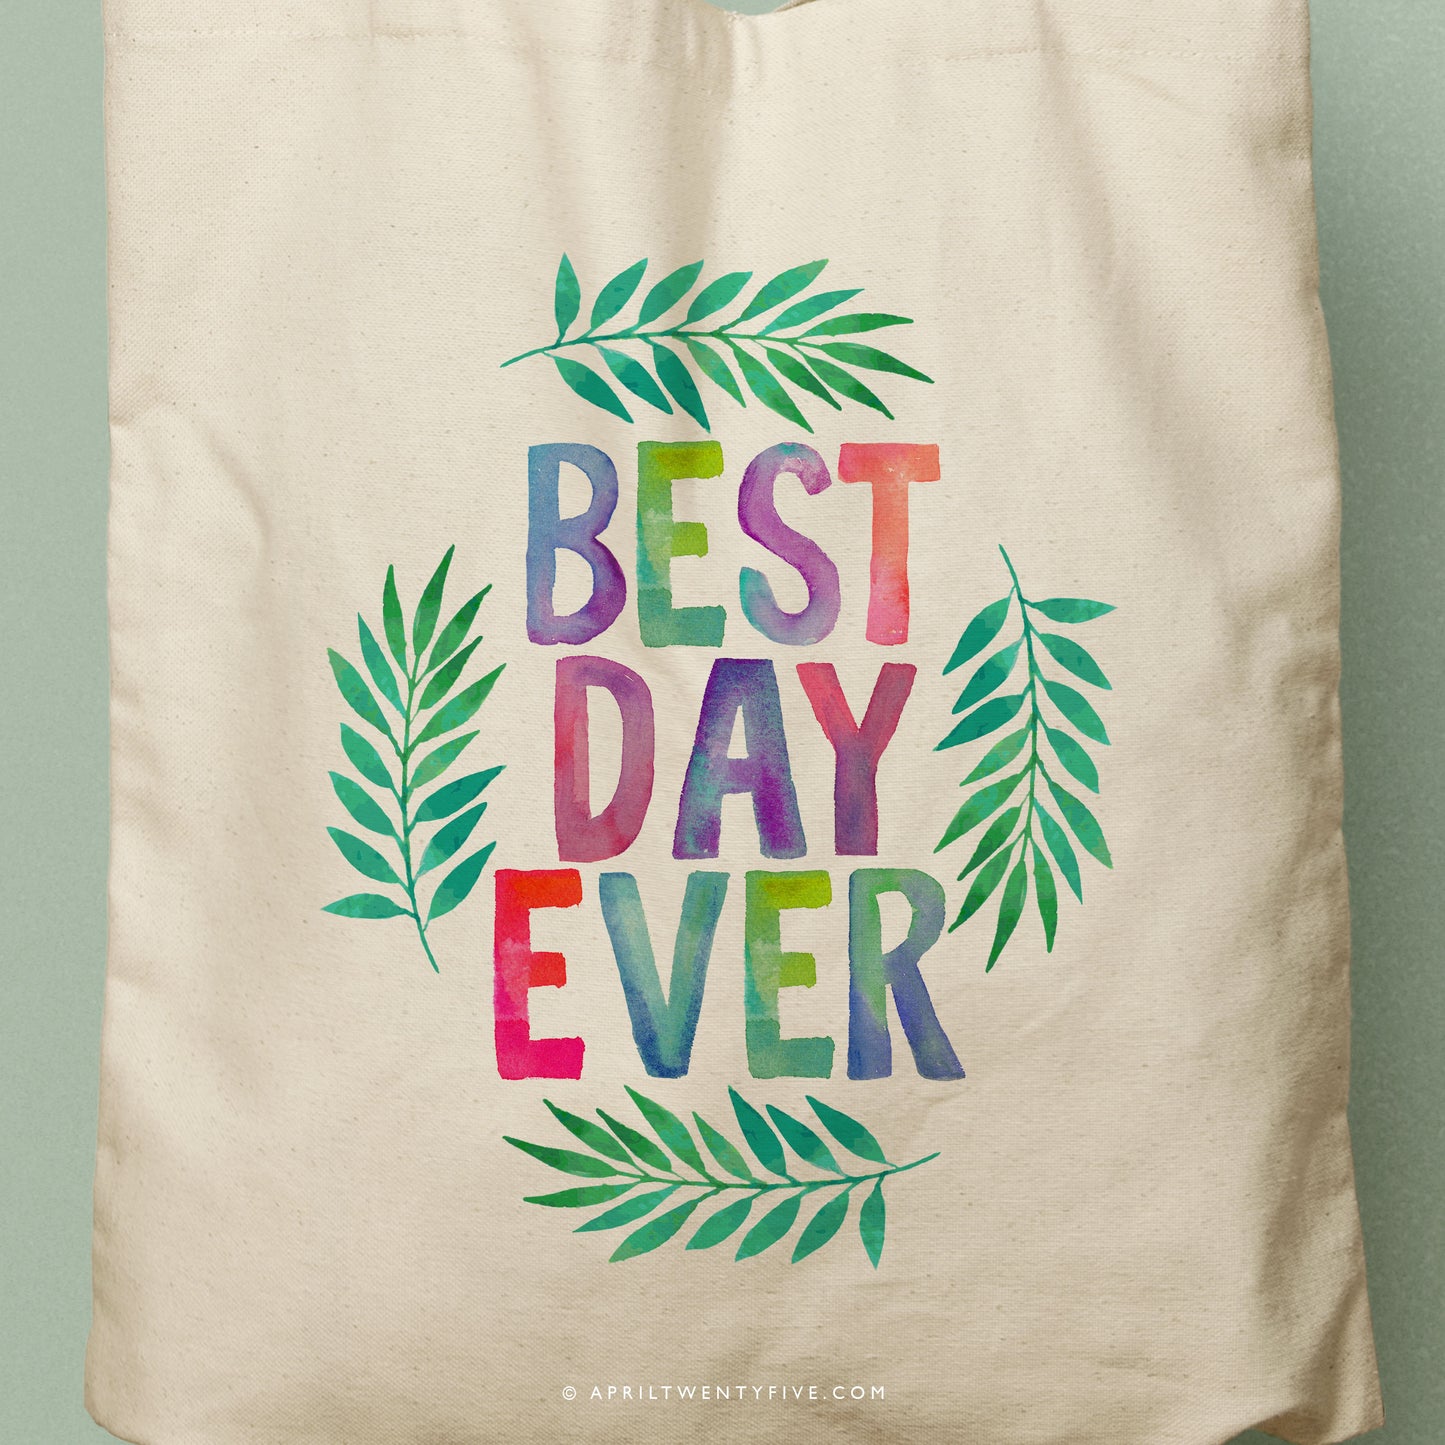 EVE | Best Day Ever Canvas Tote